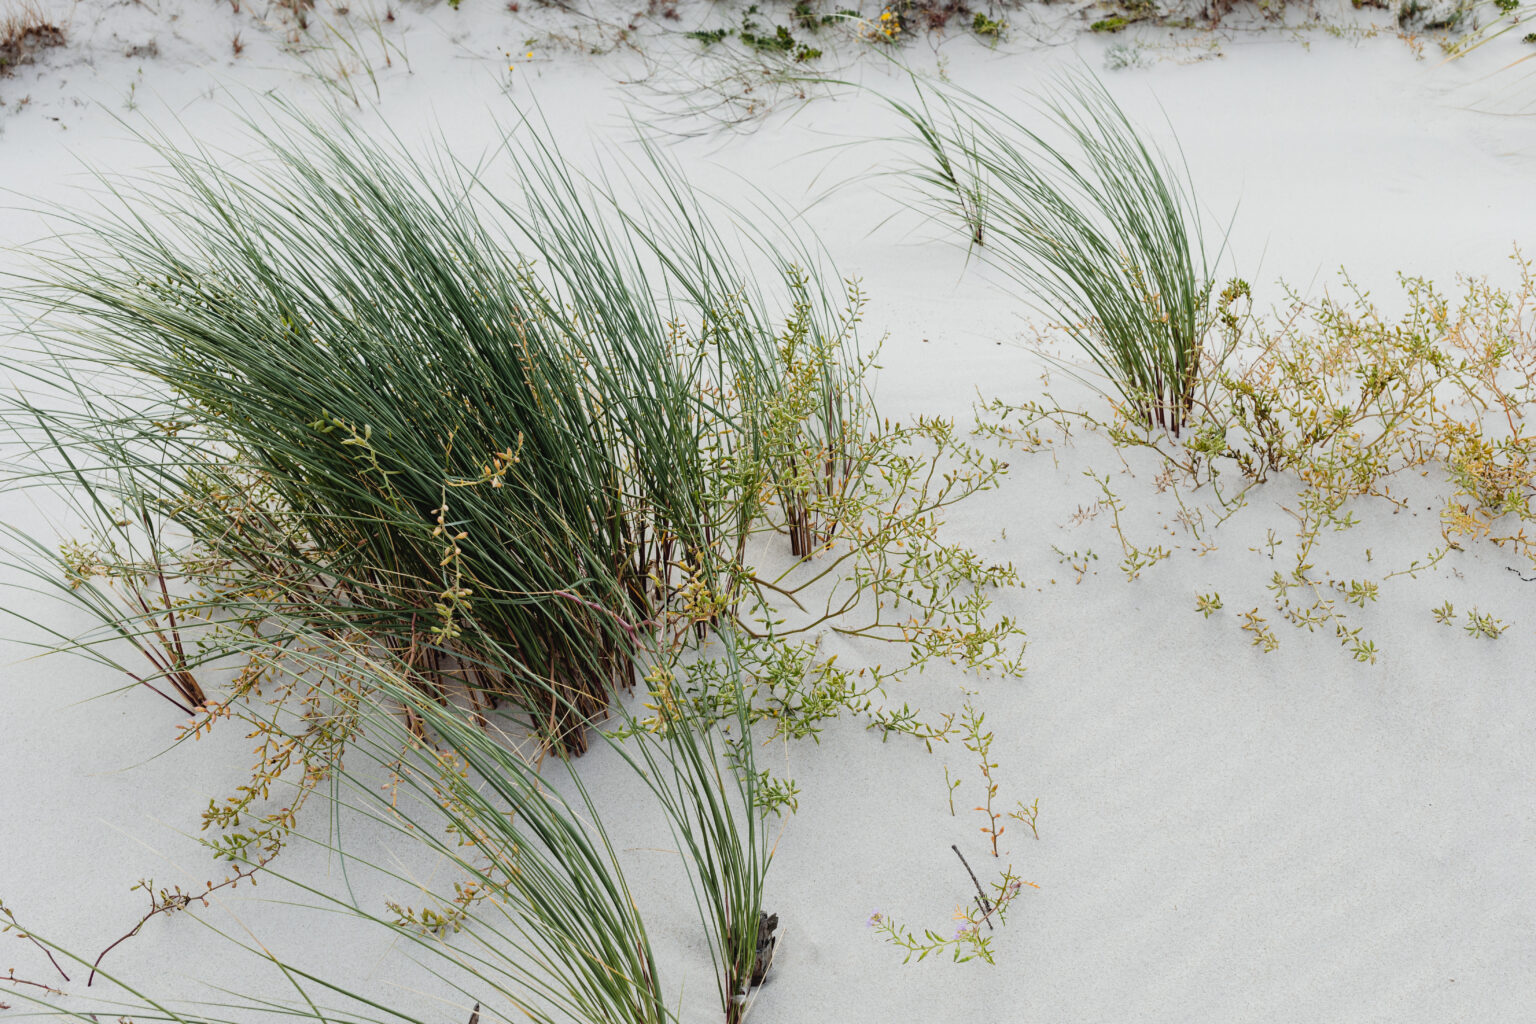 Windswept grass plumes growing out of white sand